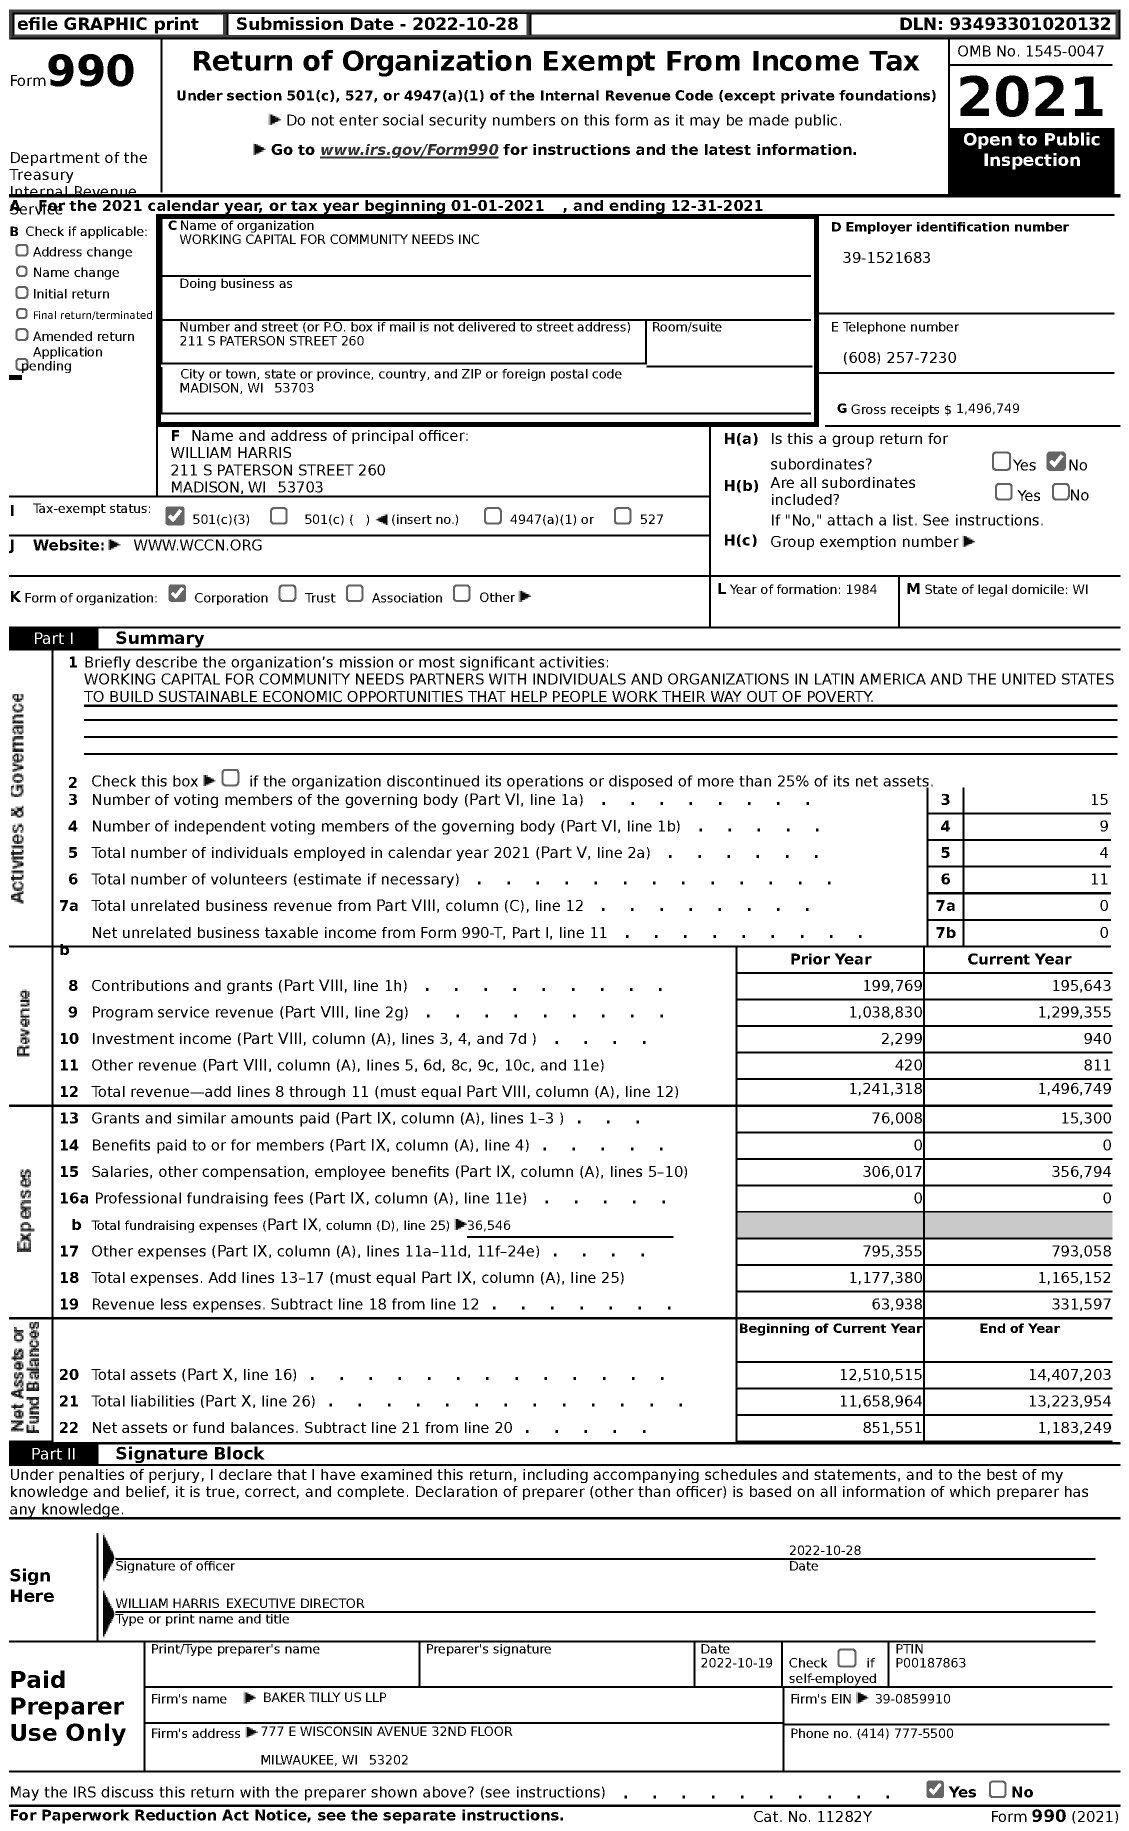 Image of first page of 2021 Form 990 for Working Capital for Community Needs (WCCN)